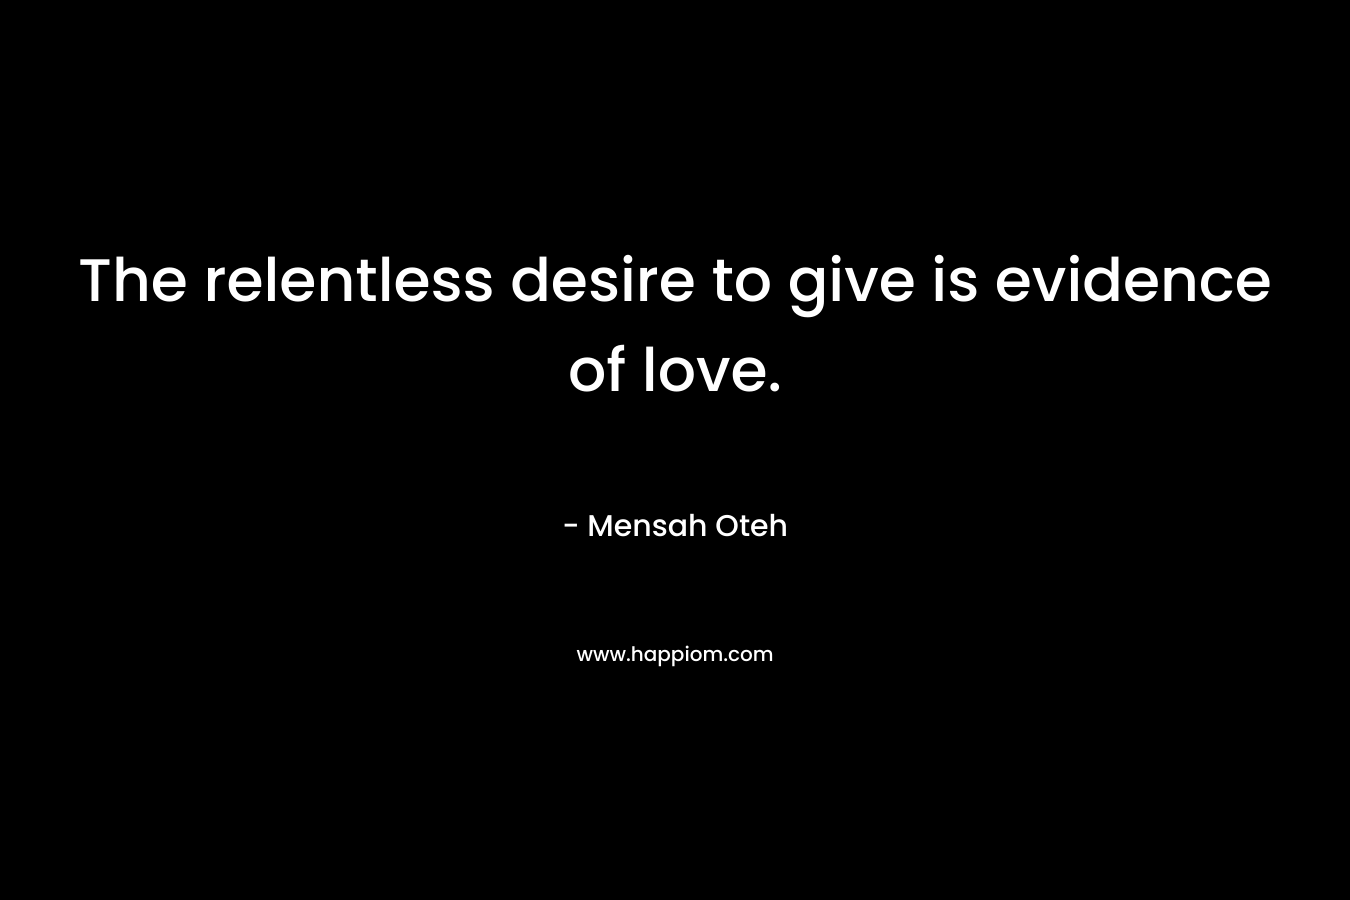 The relentless desire to give is evidence of love. – Mensah Oteh